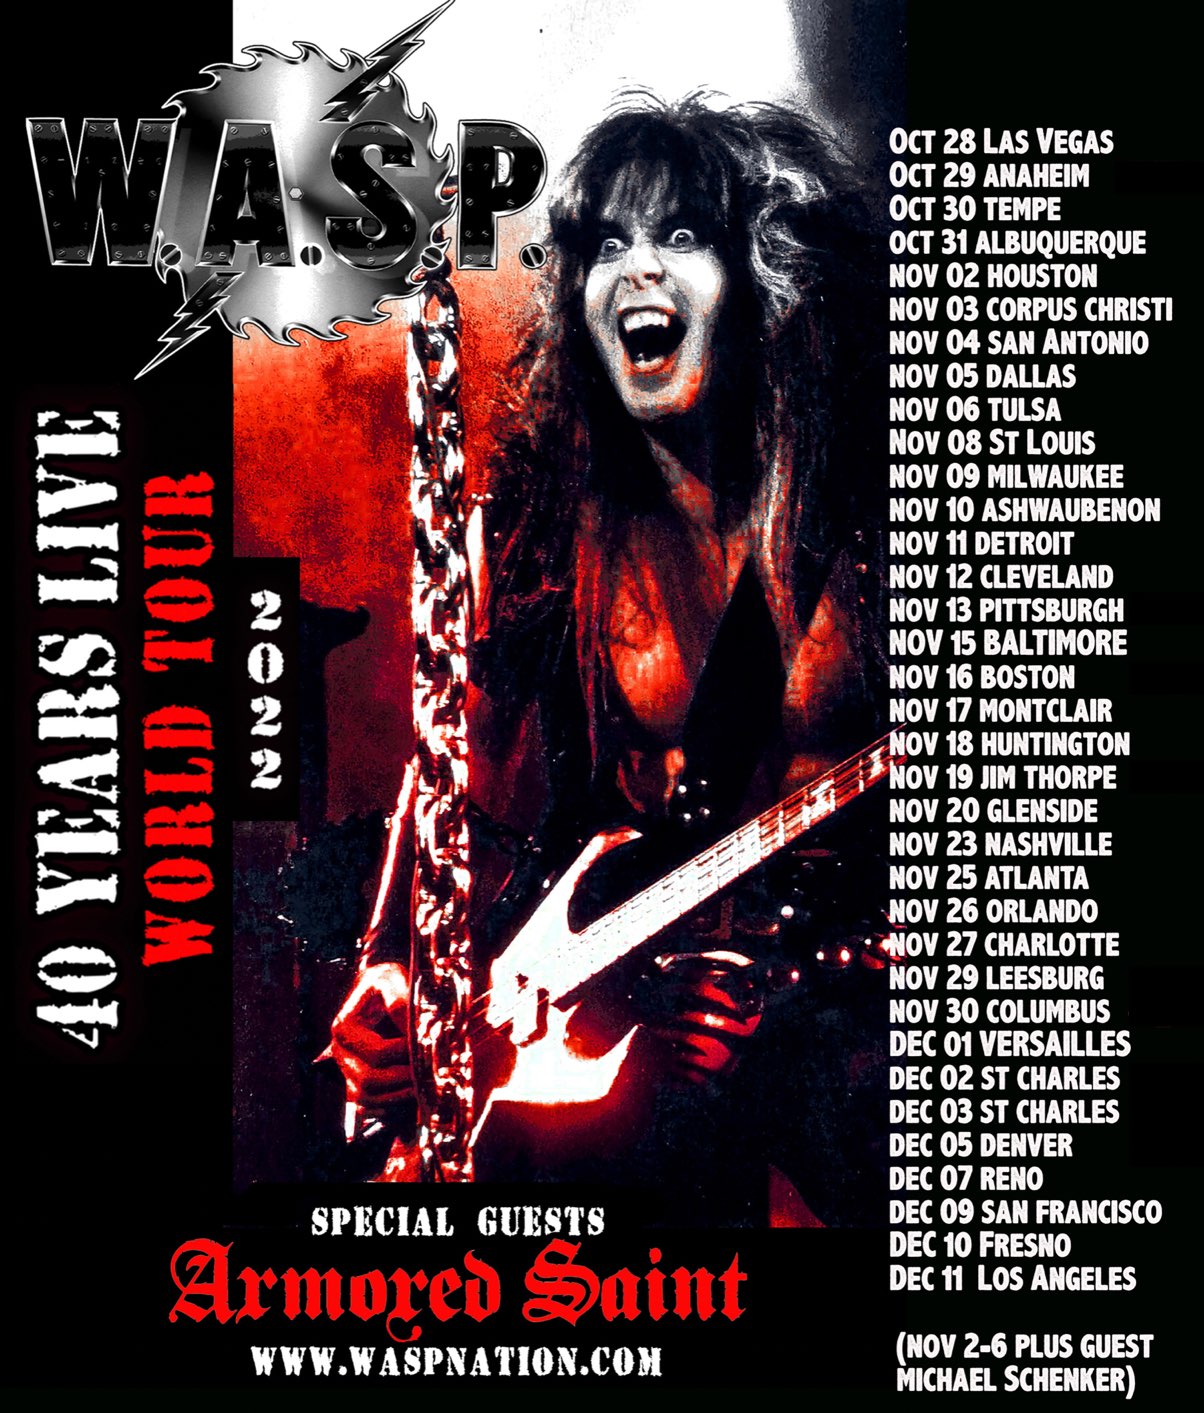 W.A.S.P. Announces VIP Meet and Greet Packages for the Upcoming U.S. Leg of the 40 Years Live World Tour